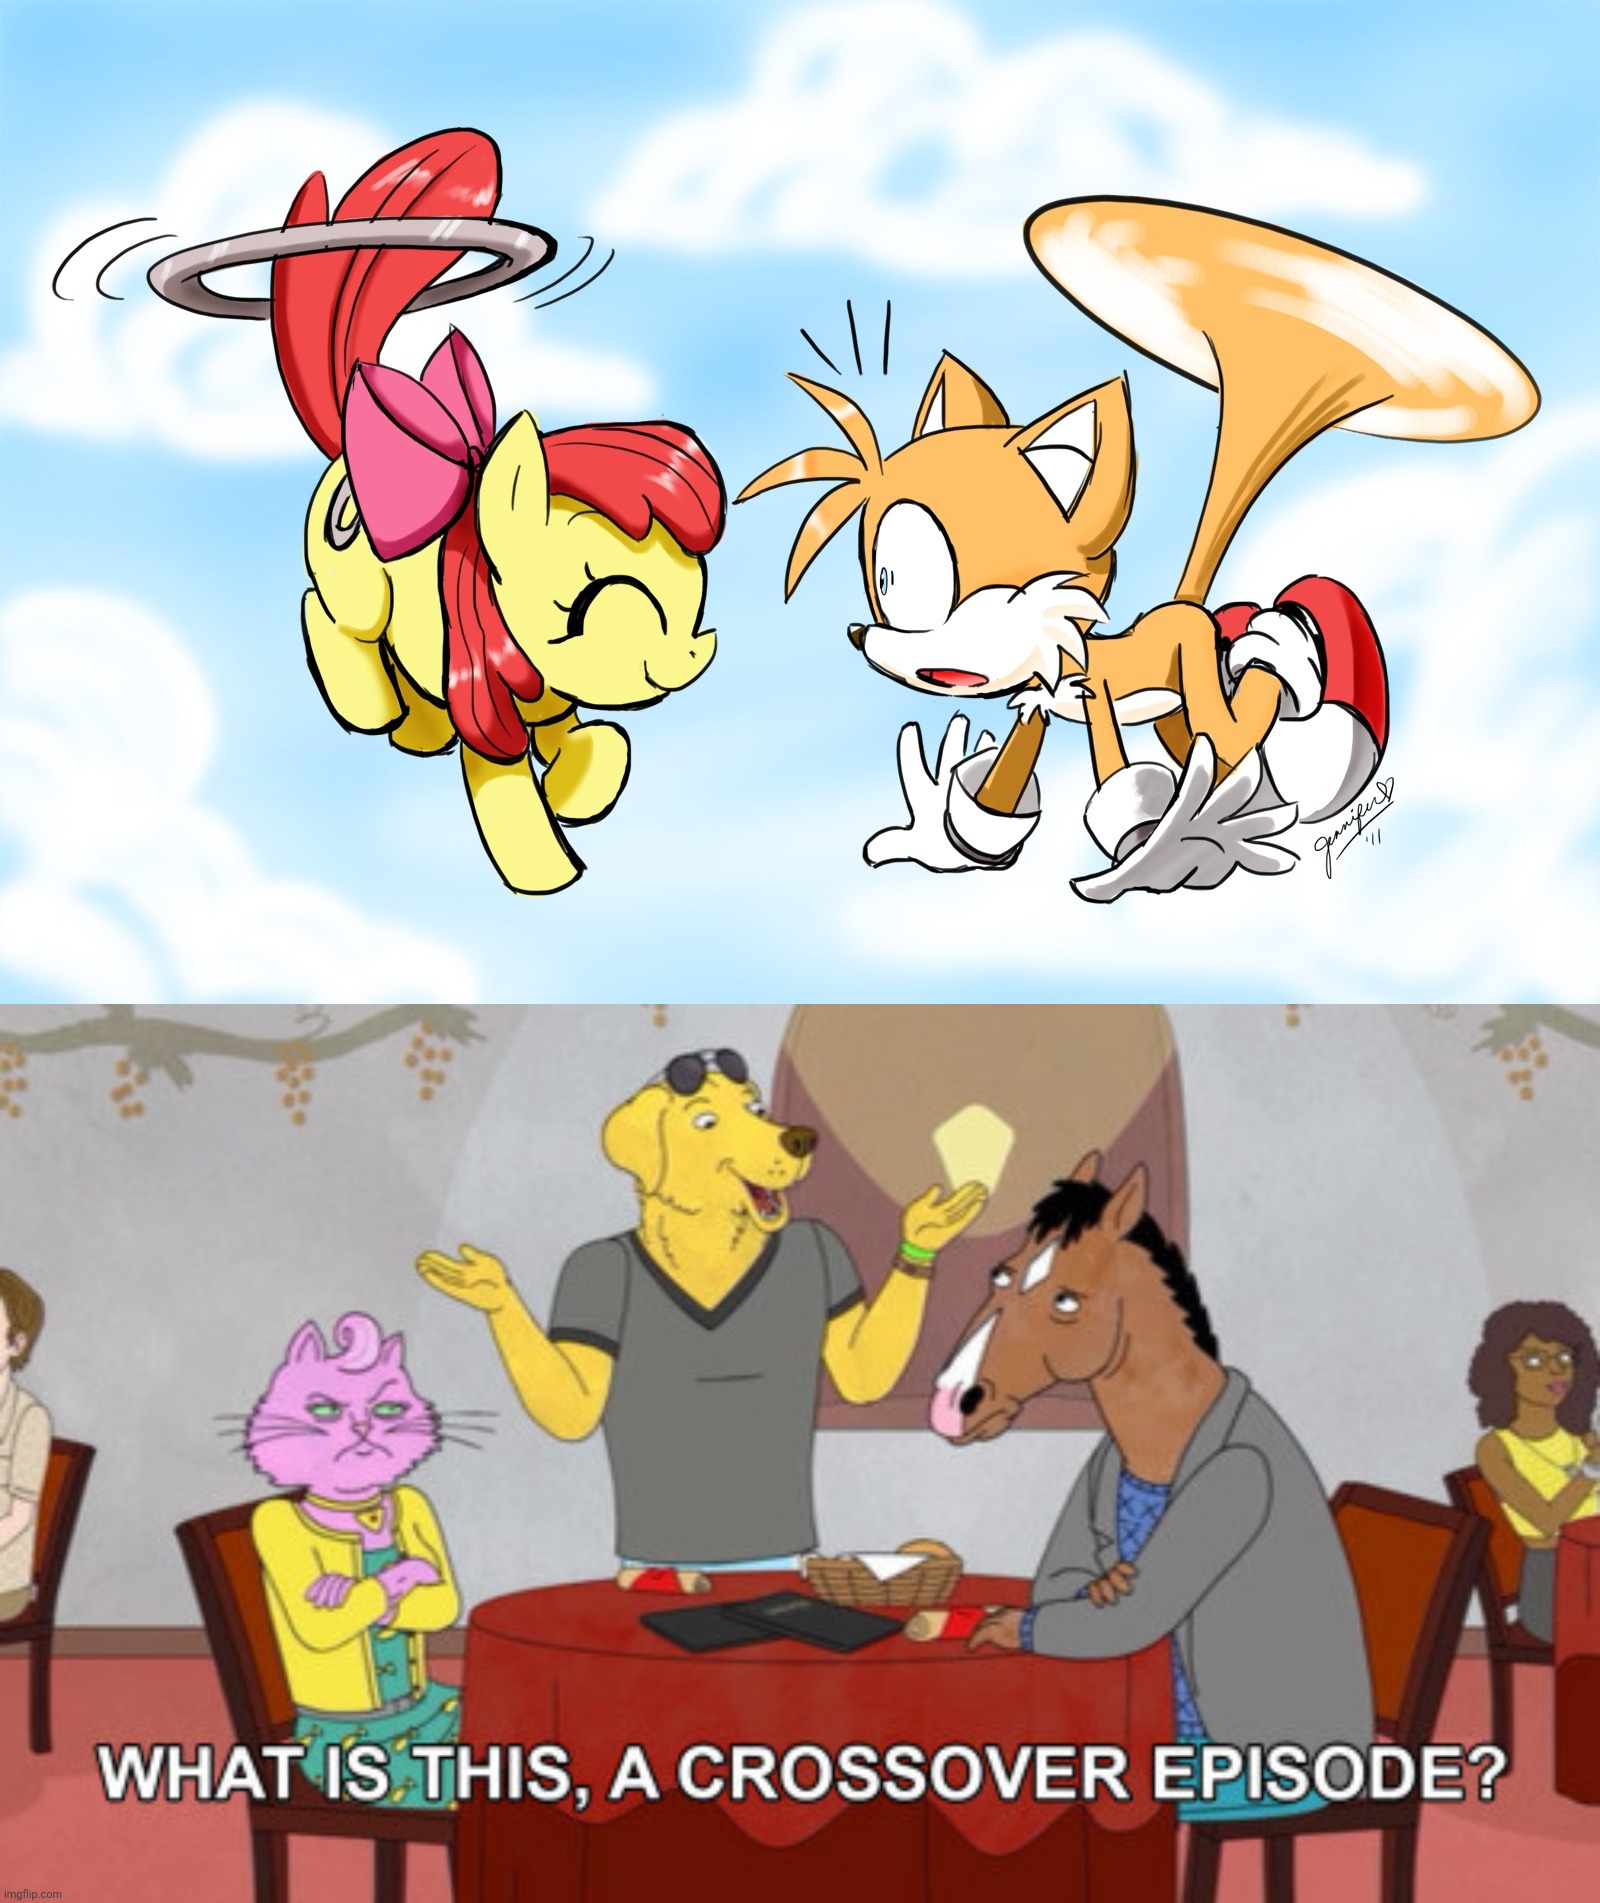 Bloomails | image tagged in what is this a crossover episode,applebloom,tails the fox,crossover | made w/ Imgflip meme maker